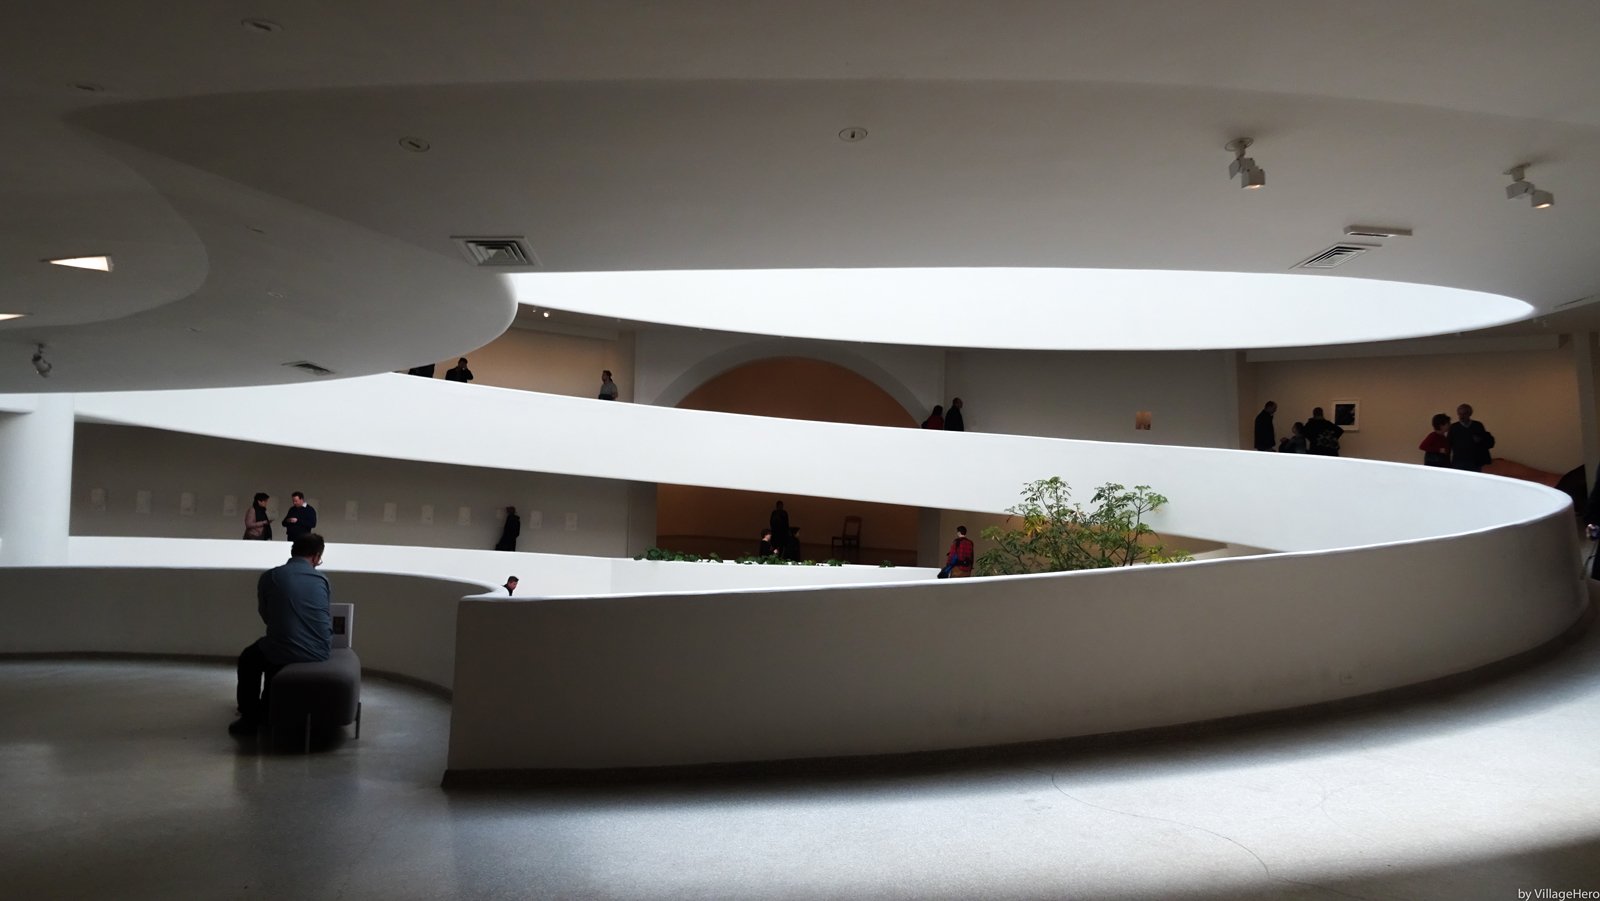 Architectural interiors at the Guggenheim (image: VillageHero, Flickr, CC BY-SA 2.0)